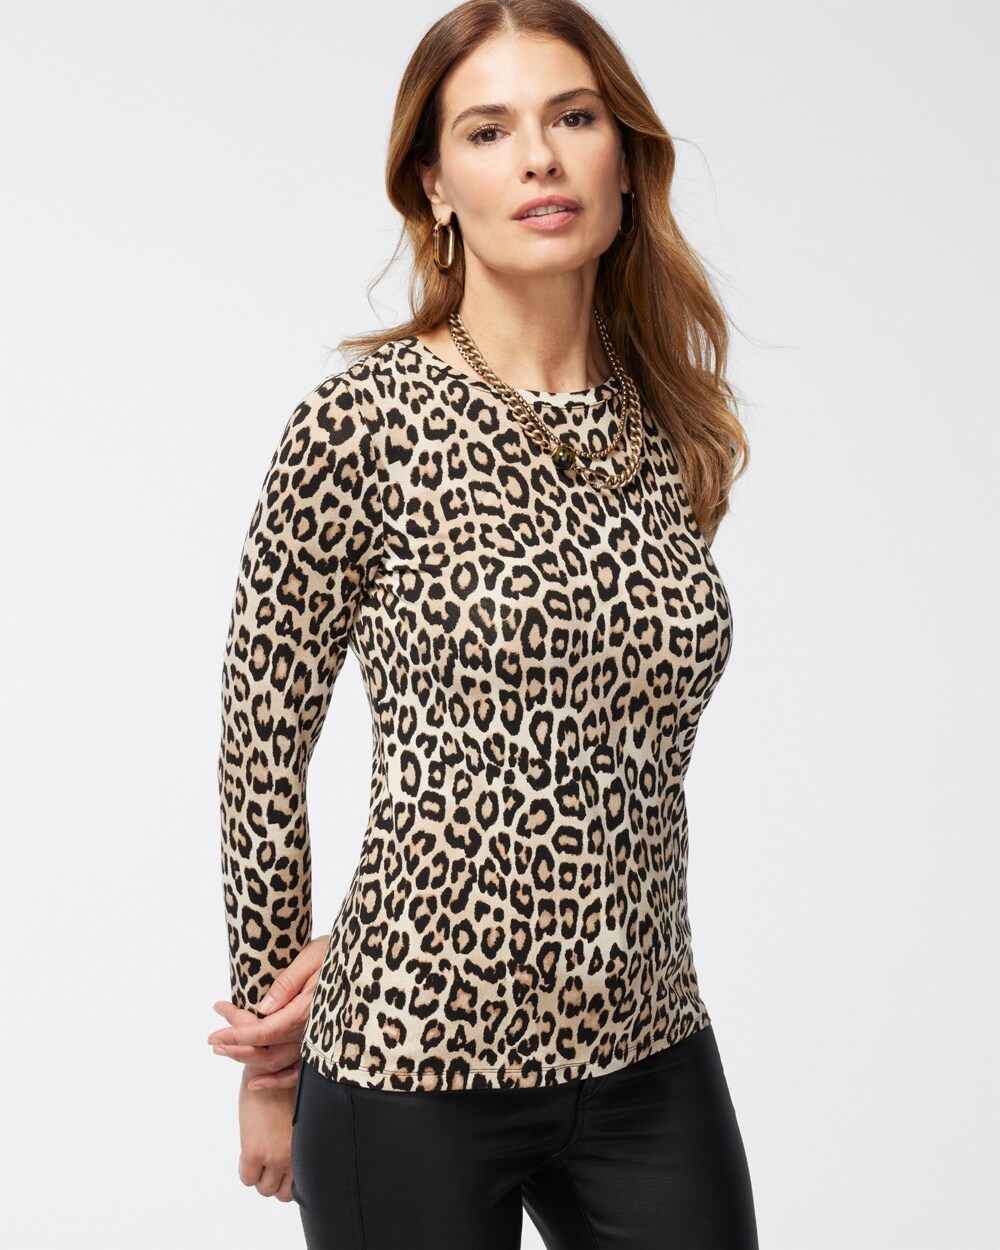 Touch of Cool Cheetah Print Layering Tee